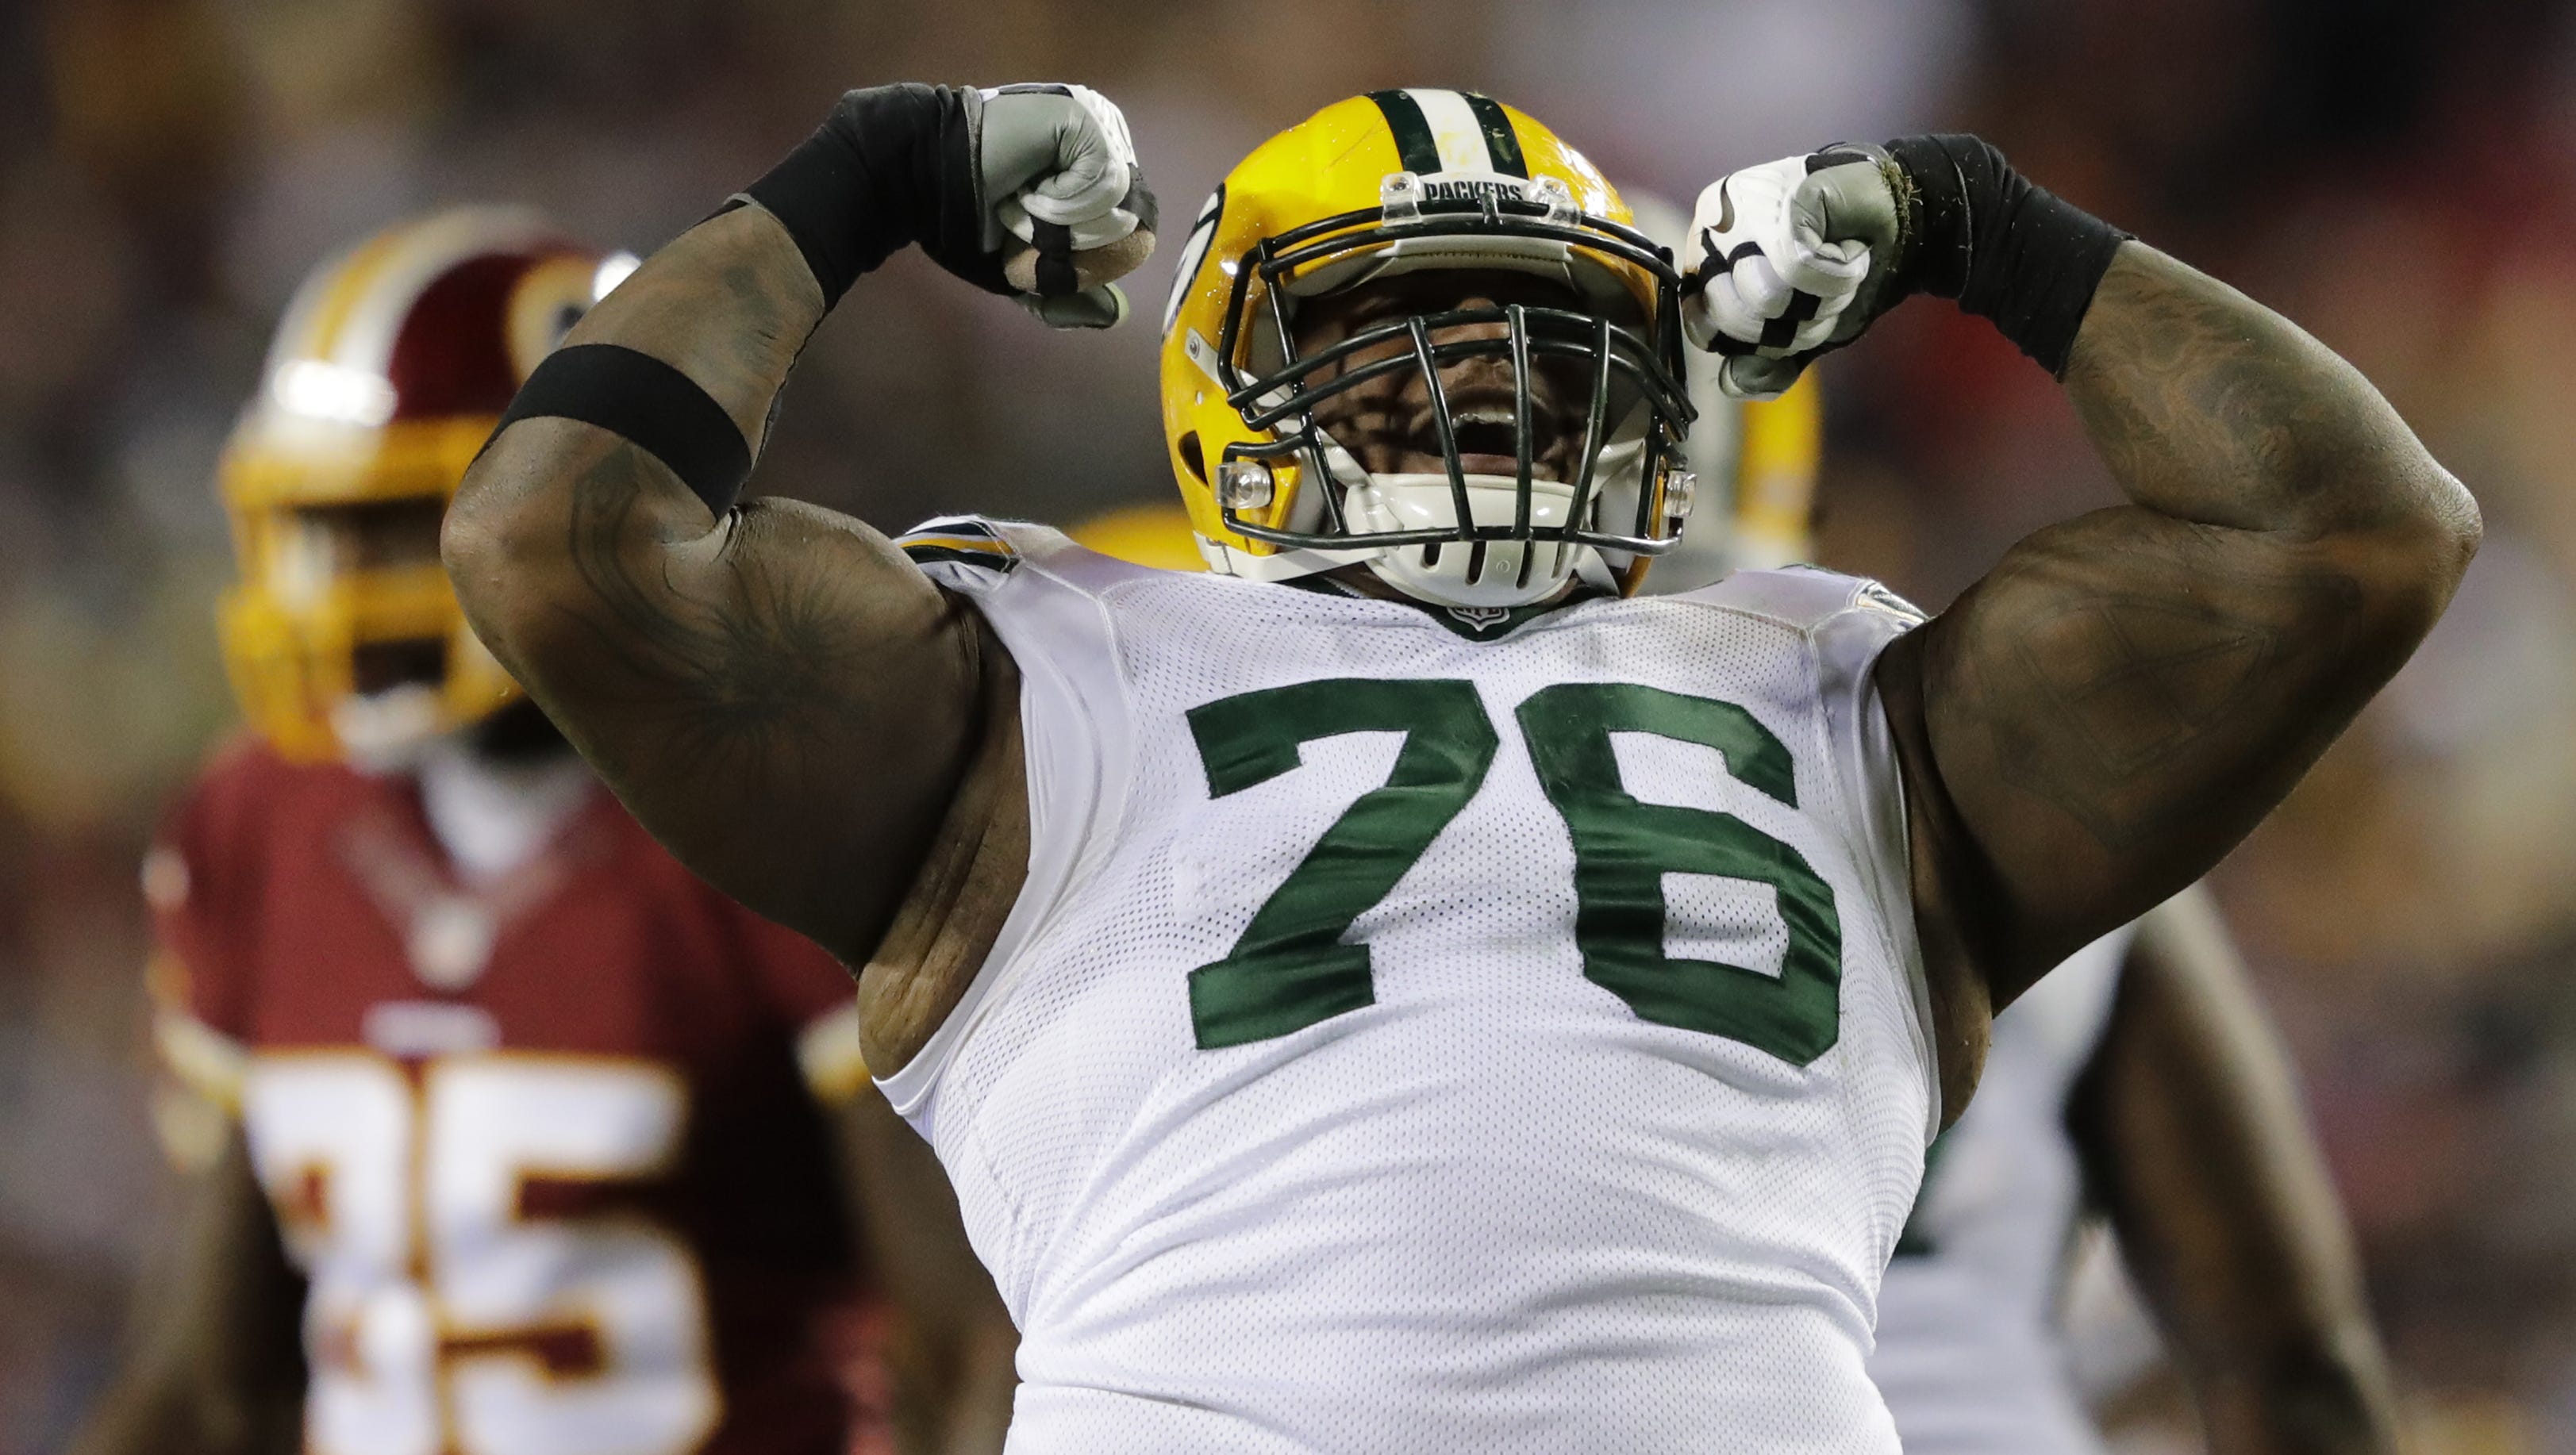 Green Bay defensive end Mike Daniels celebrates making a tackle in the second quarter on Nov. 20, 2016, at FedEx Field.